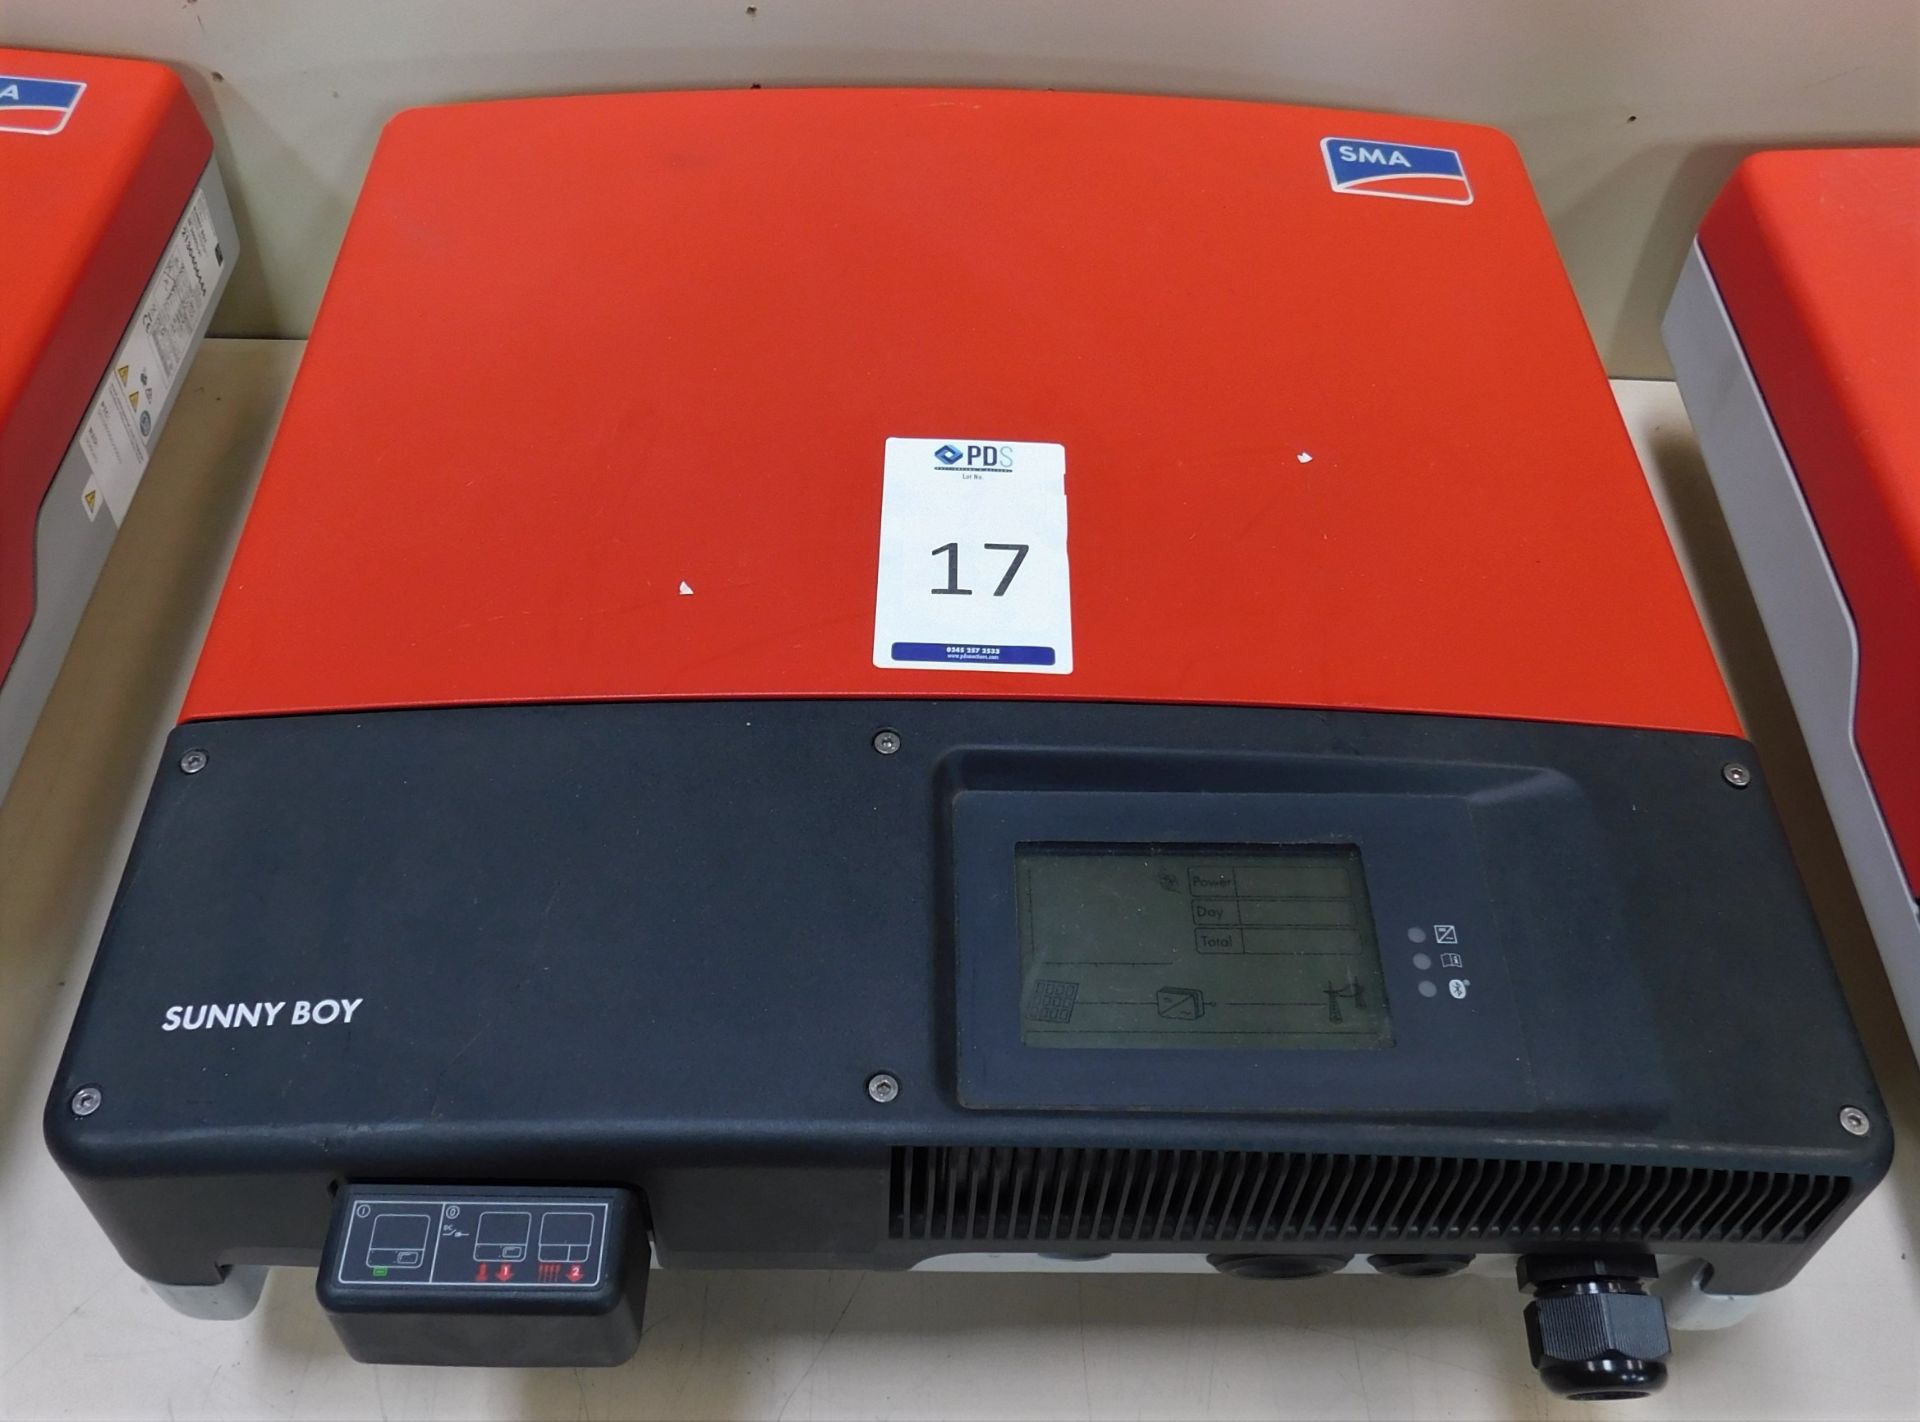 SMA “Sunny Boy” SB3600TL-21 Solar Inverter (Location: Brentwood: Please Refer to General Notes)